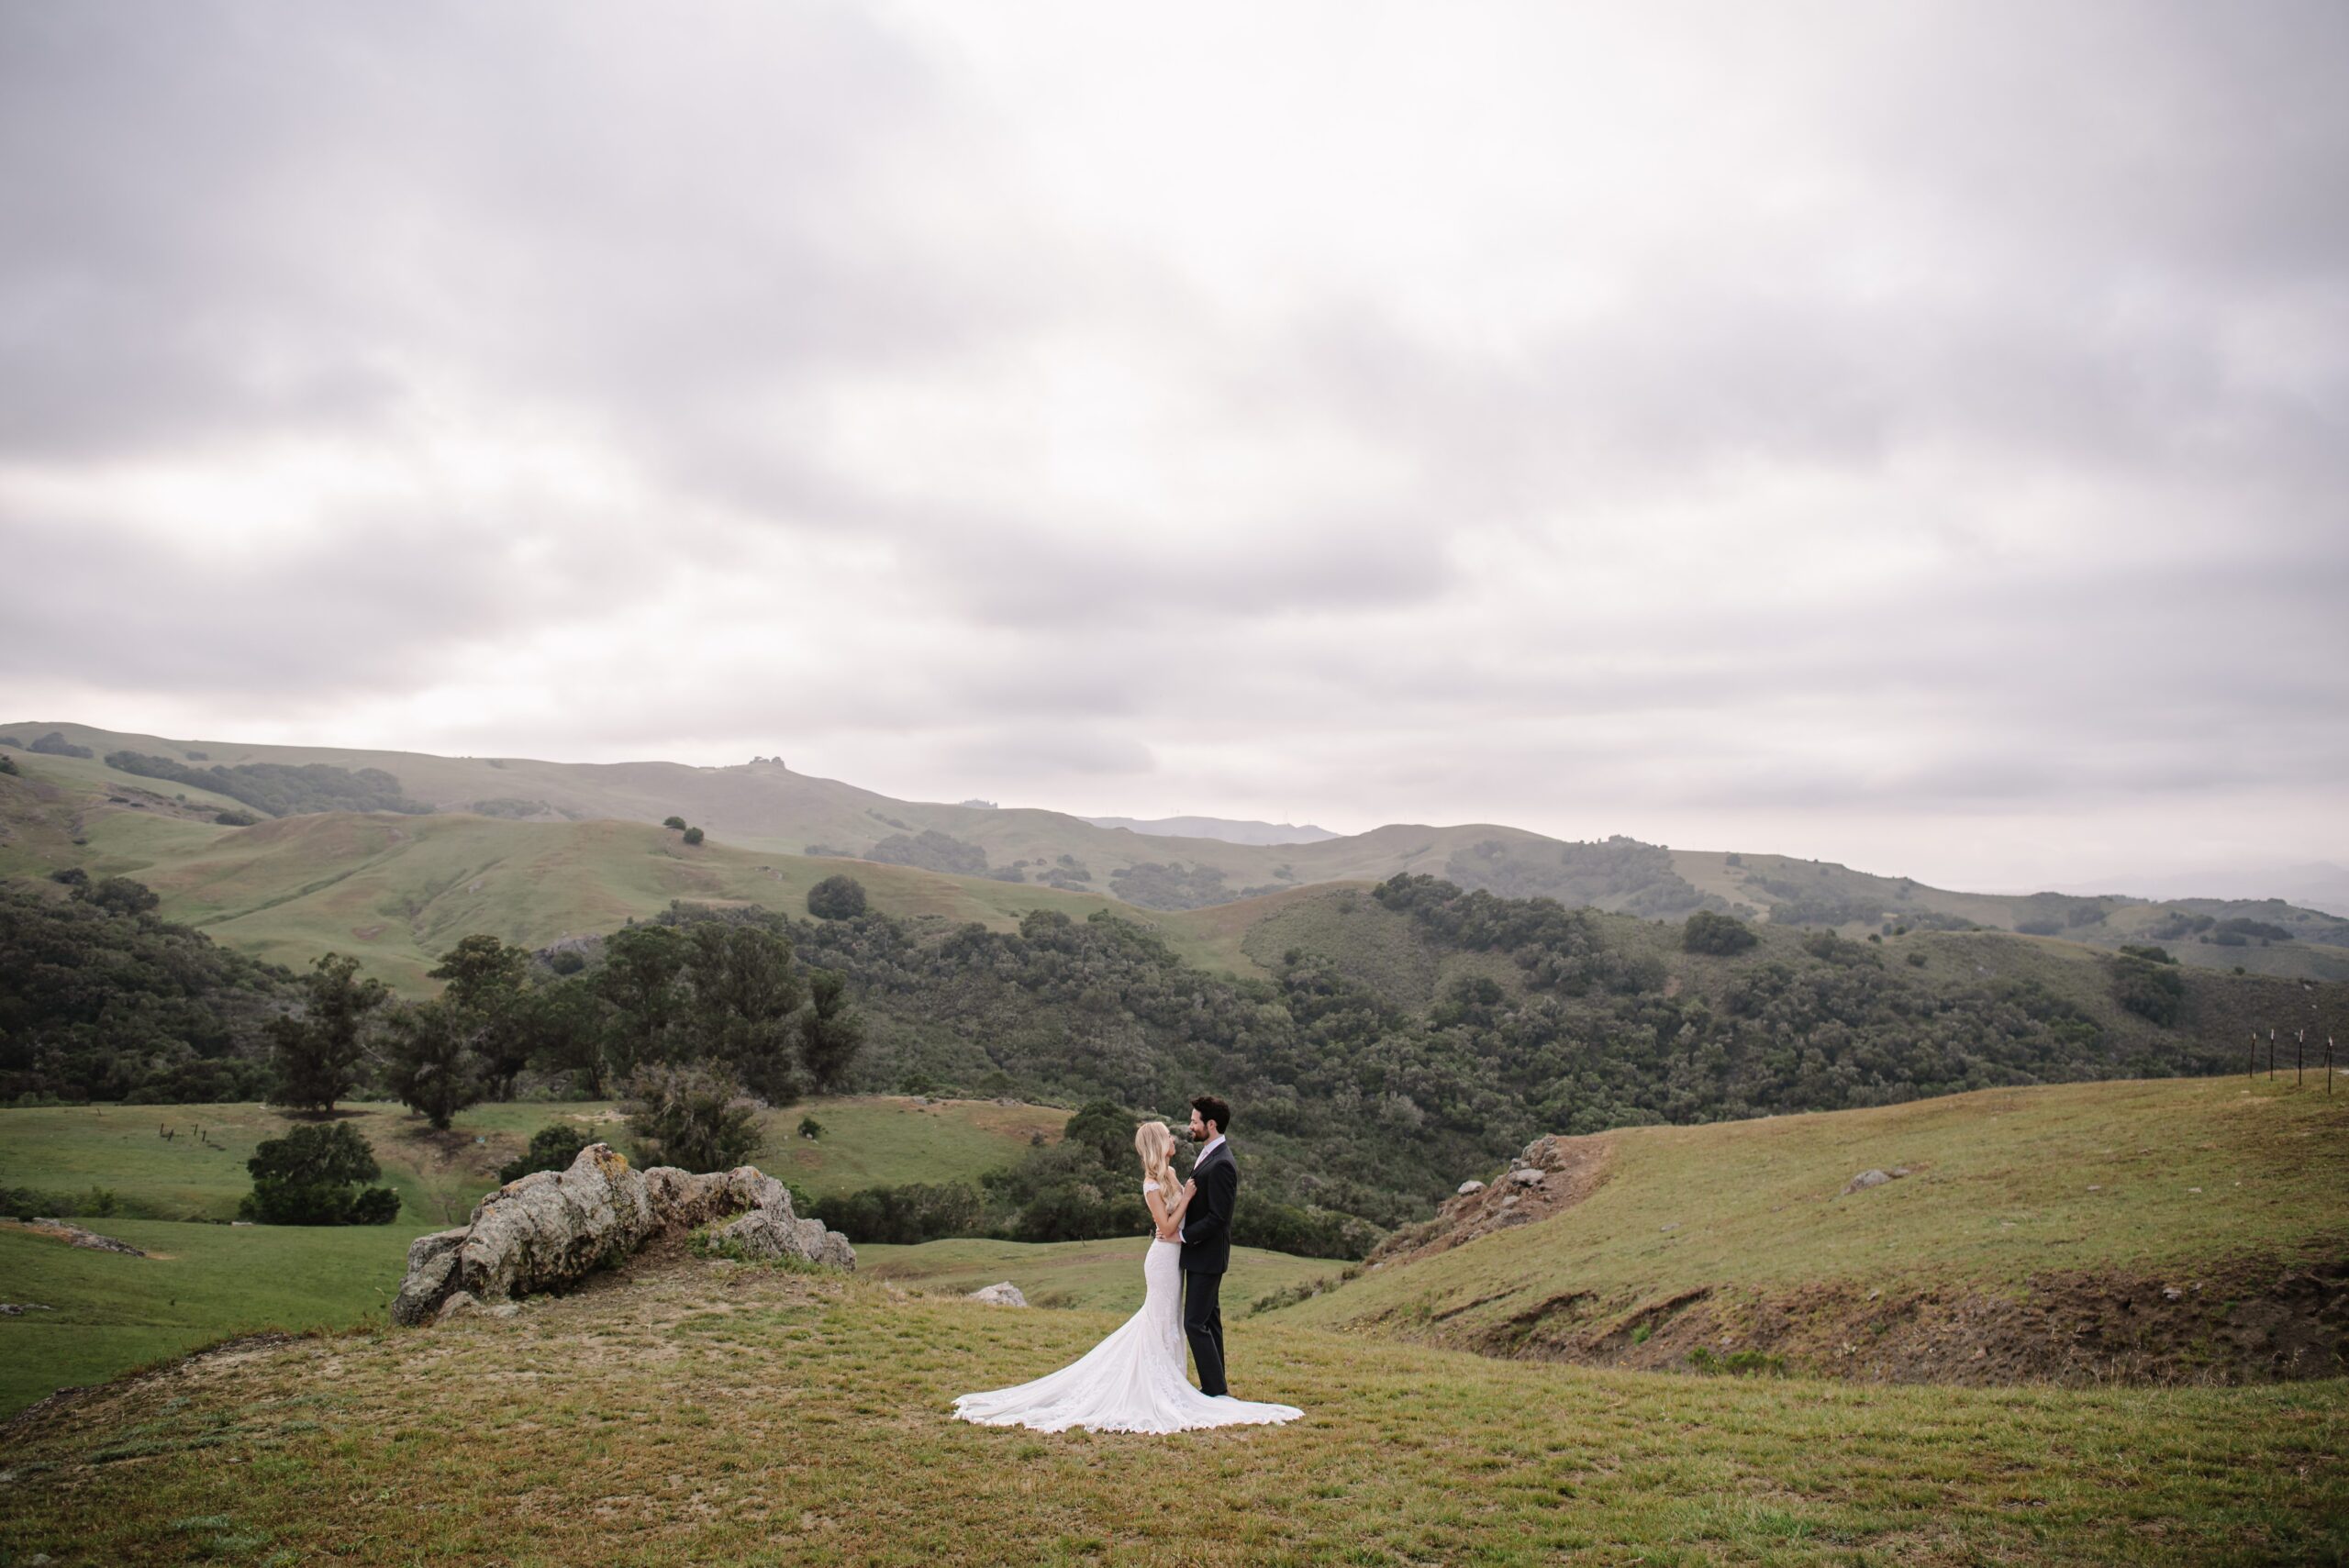 Michele Hastings with Nikkles Photography, a San Luis Obispo Wedding Photographer, shares her tips for understanding wedding day finances. She explains where to save and where to splurge on your special day.